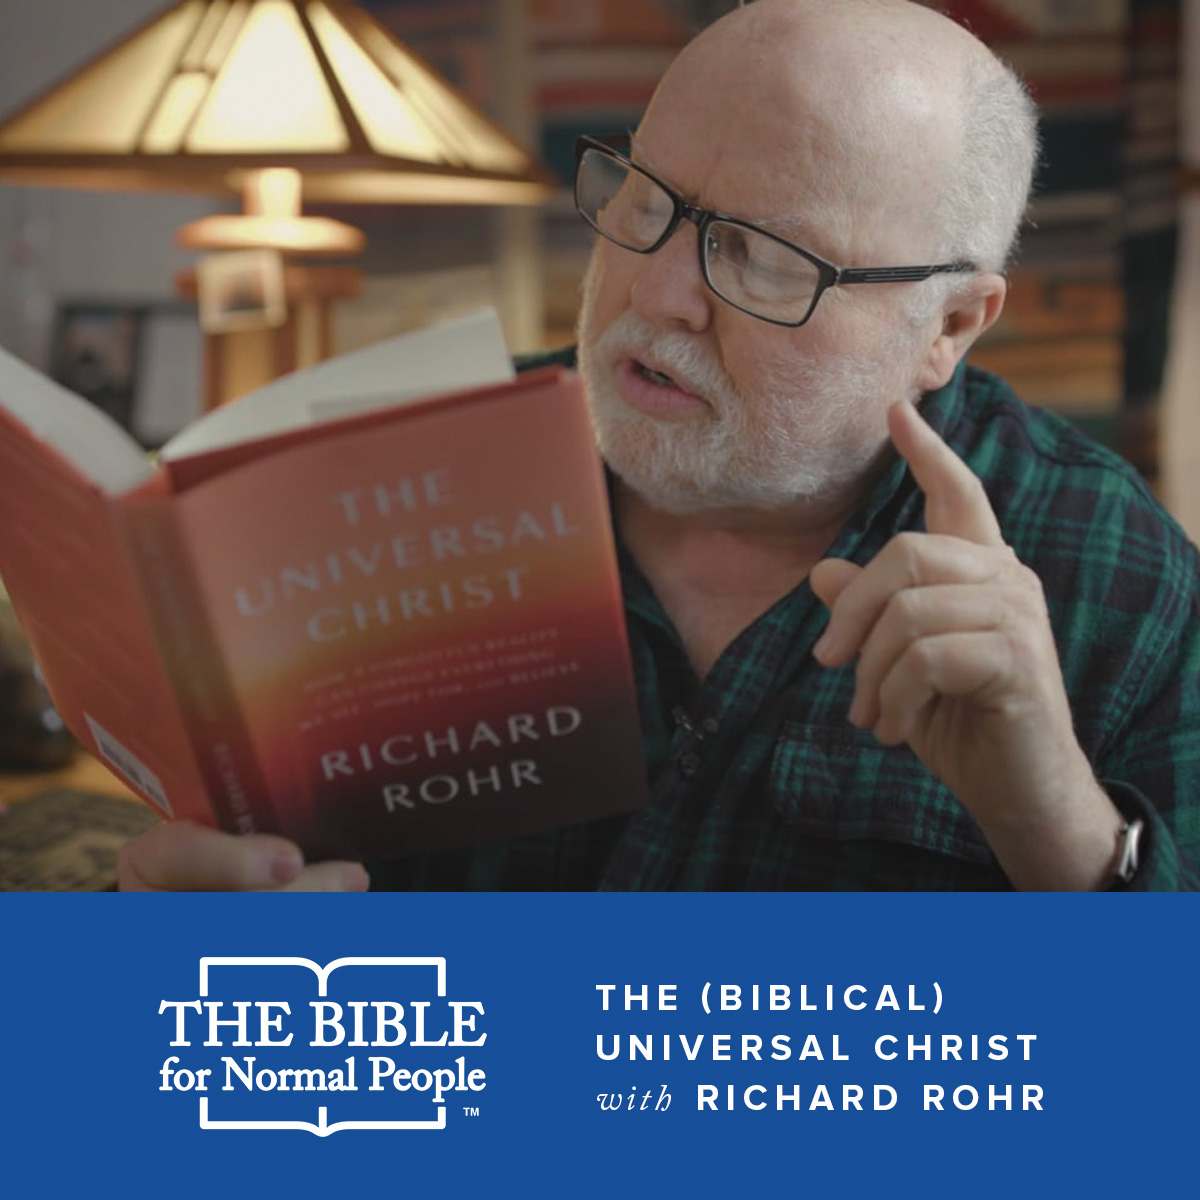 Interview with Richard Rohr: The (Biblical) Universal Christ